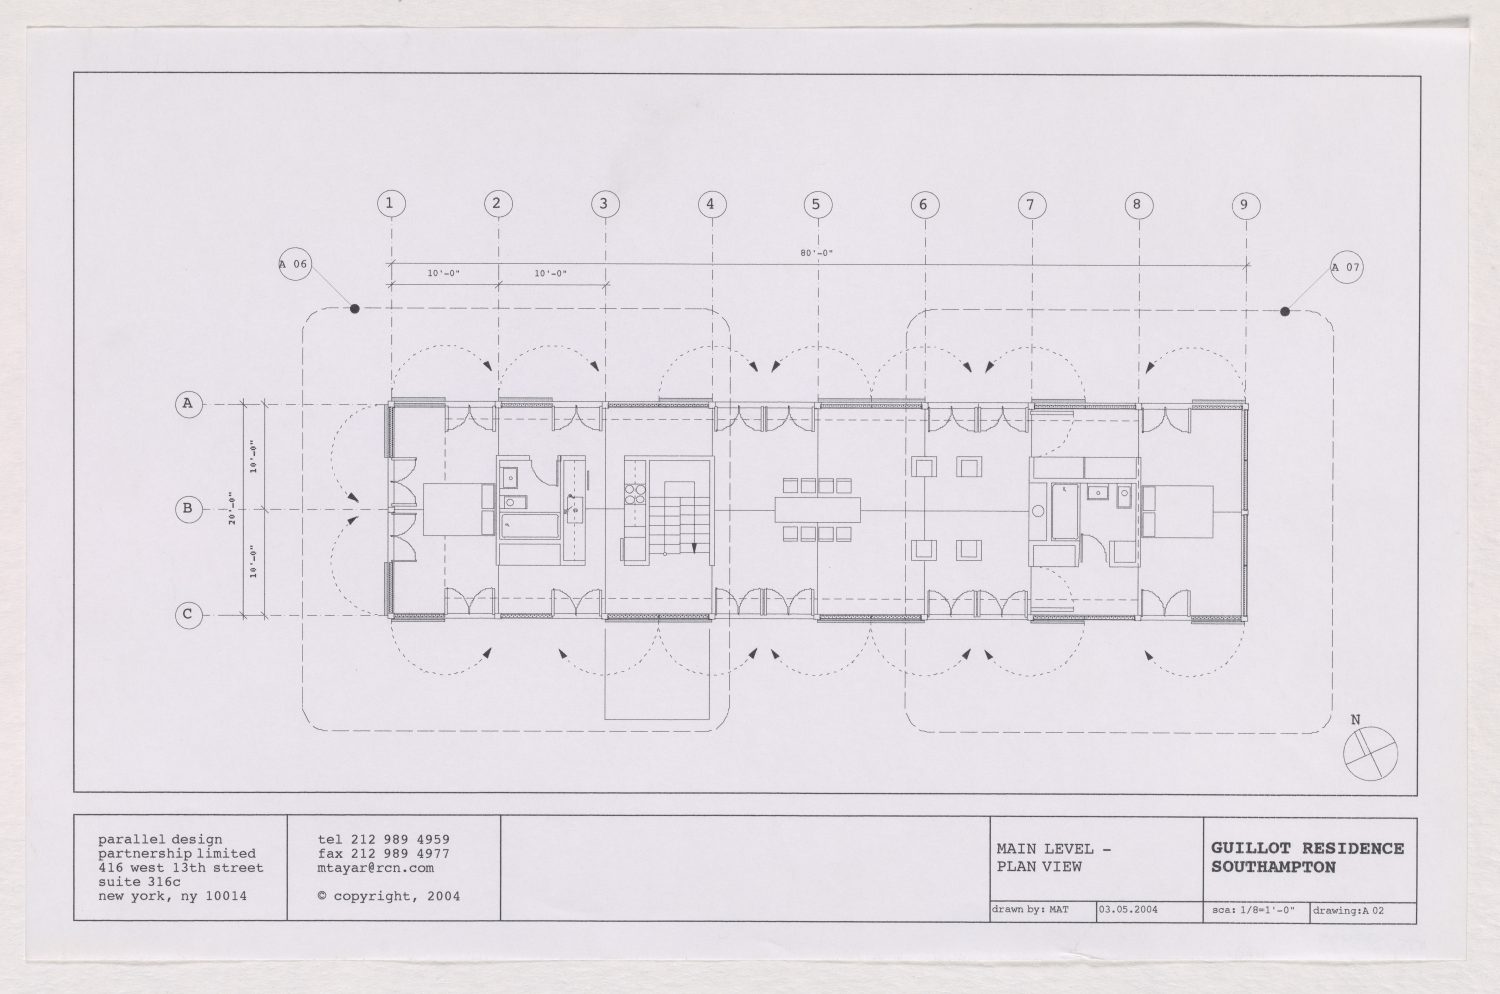 Parallel Design  - A group of selected drawings, plans, and elevations for a proposed private residence in Southampton, New York, for noted landscape architect Perry Guillot. While the residence was ultimately never constructed, many of the elements found in this project, including the thoroughly engineered, hurricane-proof structural designs and a deep connection to the surrounding landscape, can be found in the home that Tayar designed on Block Island, RI.&nbsp;